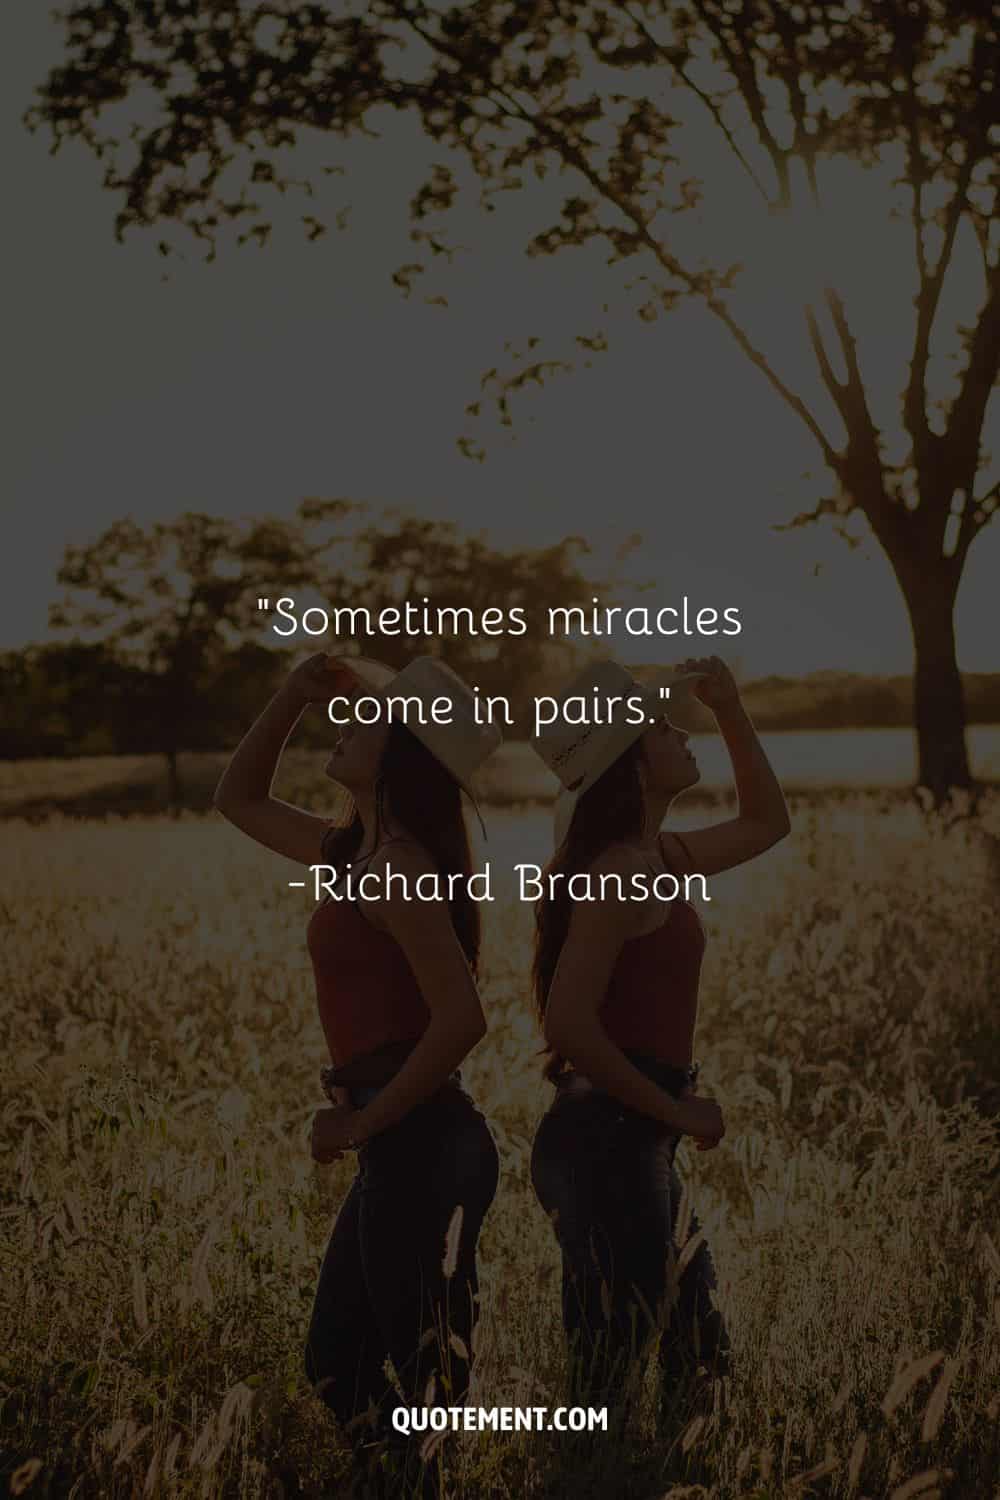 “Sometimes miracles come in pairs.” – Richard Branson